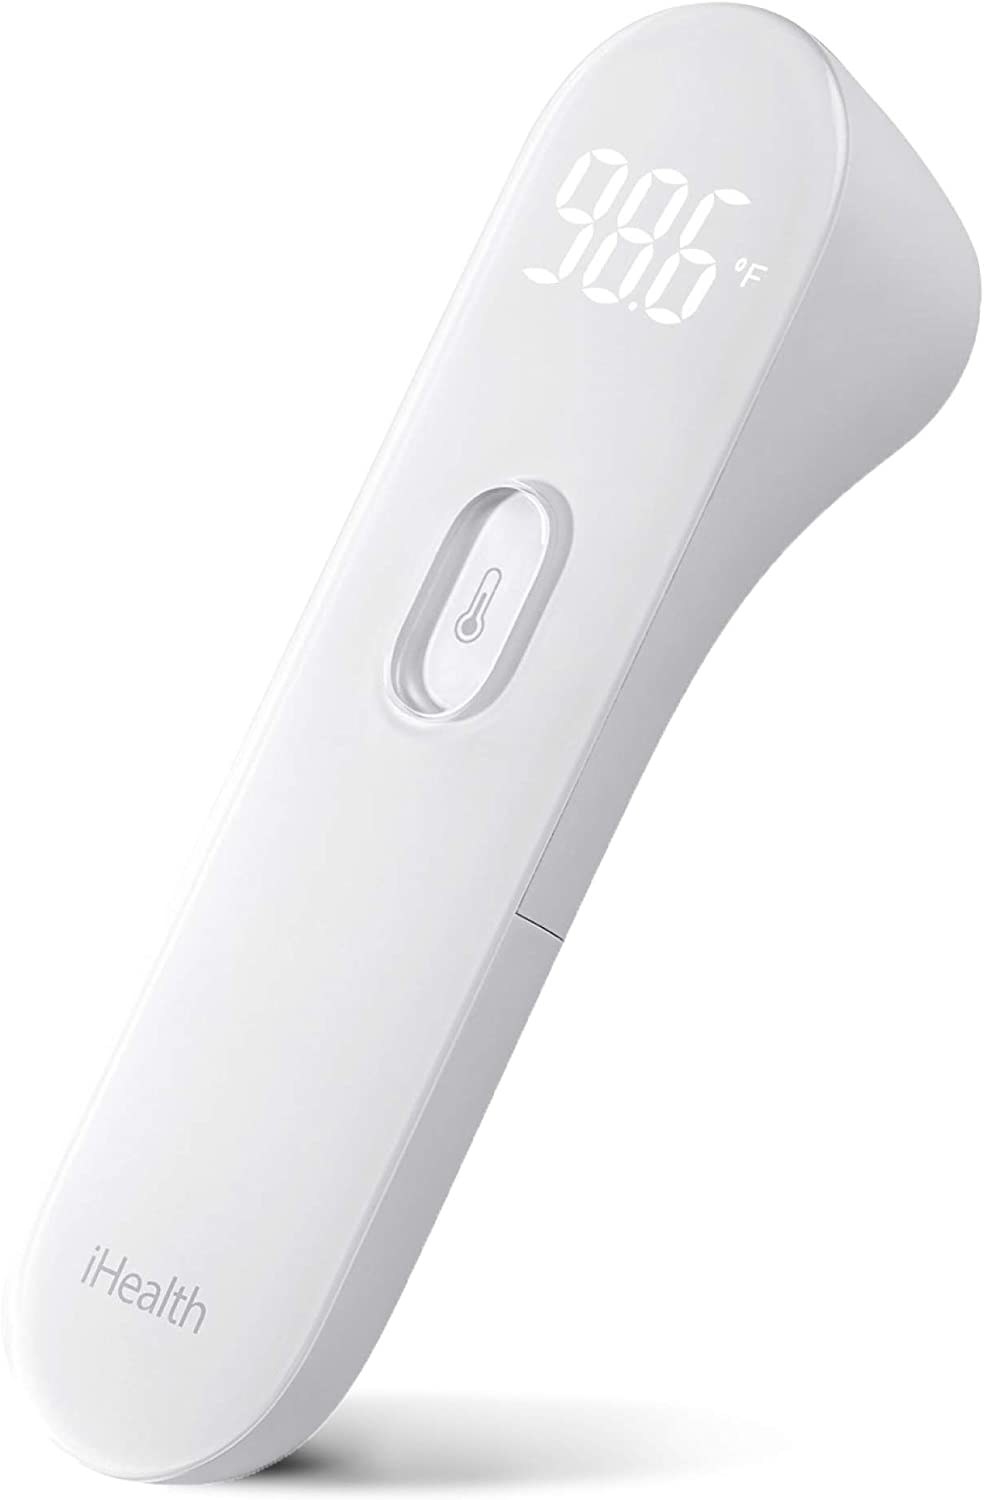 The forehead thermometer in white